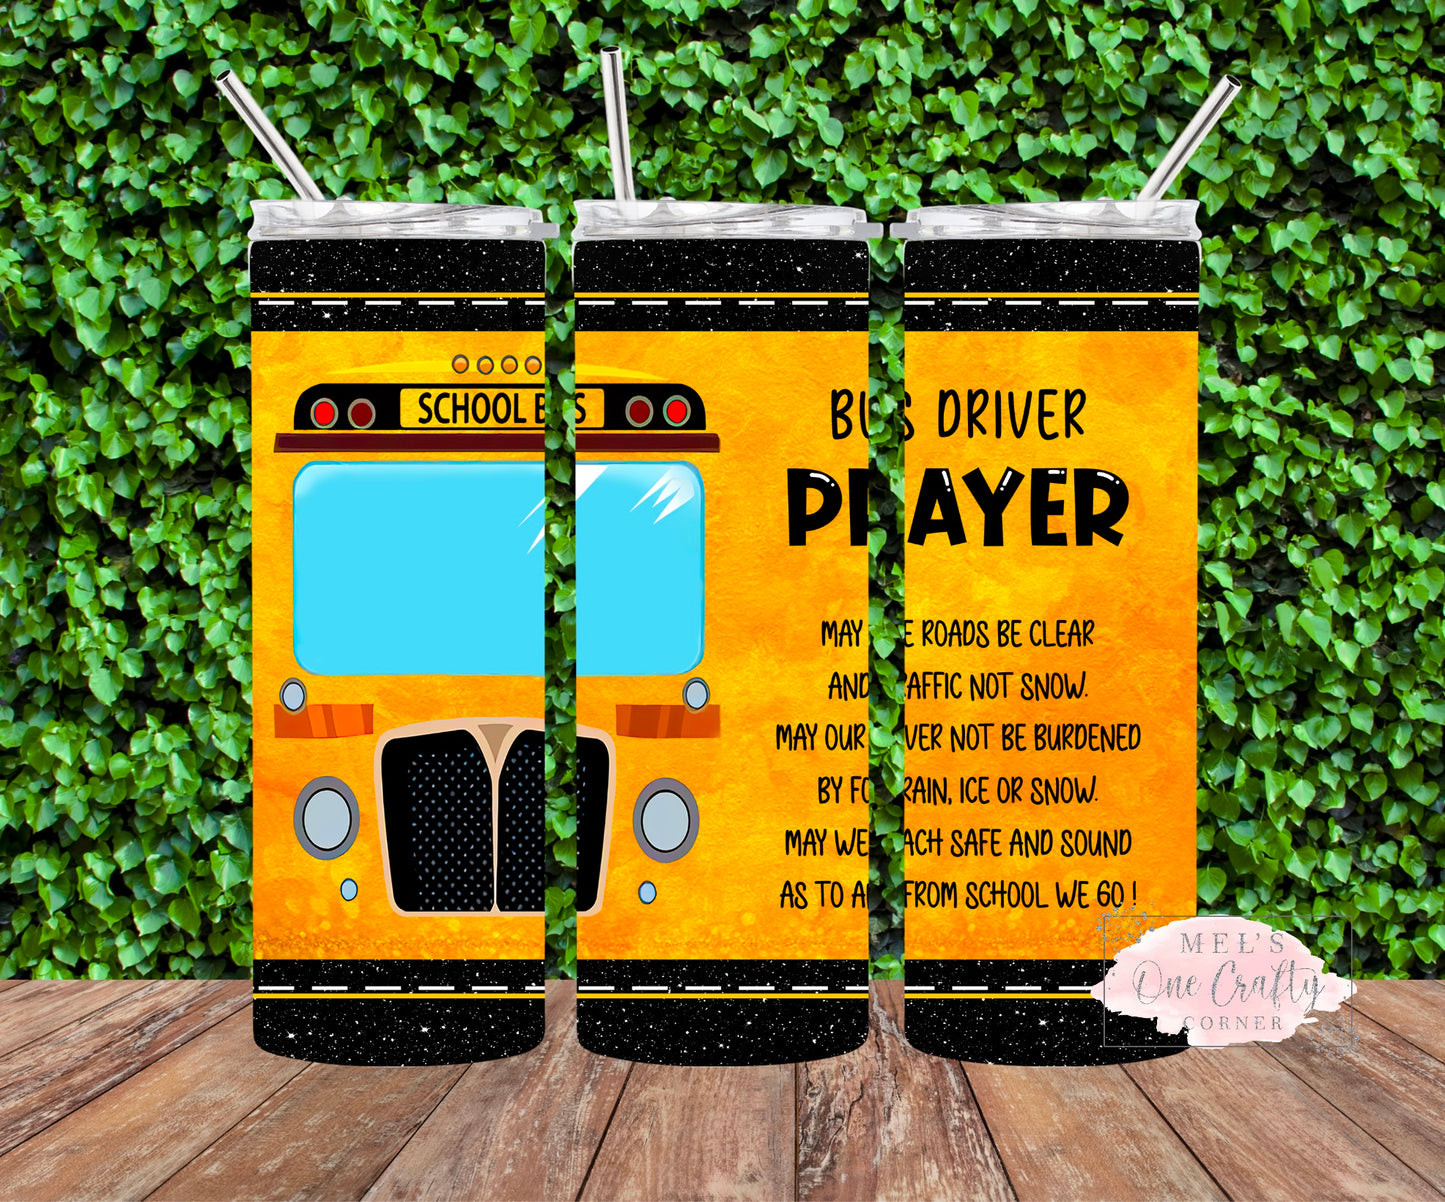 Get your hands on the latest range of 20 oz. Bus driver thermos